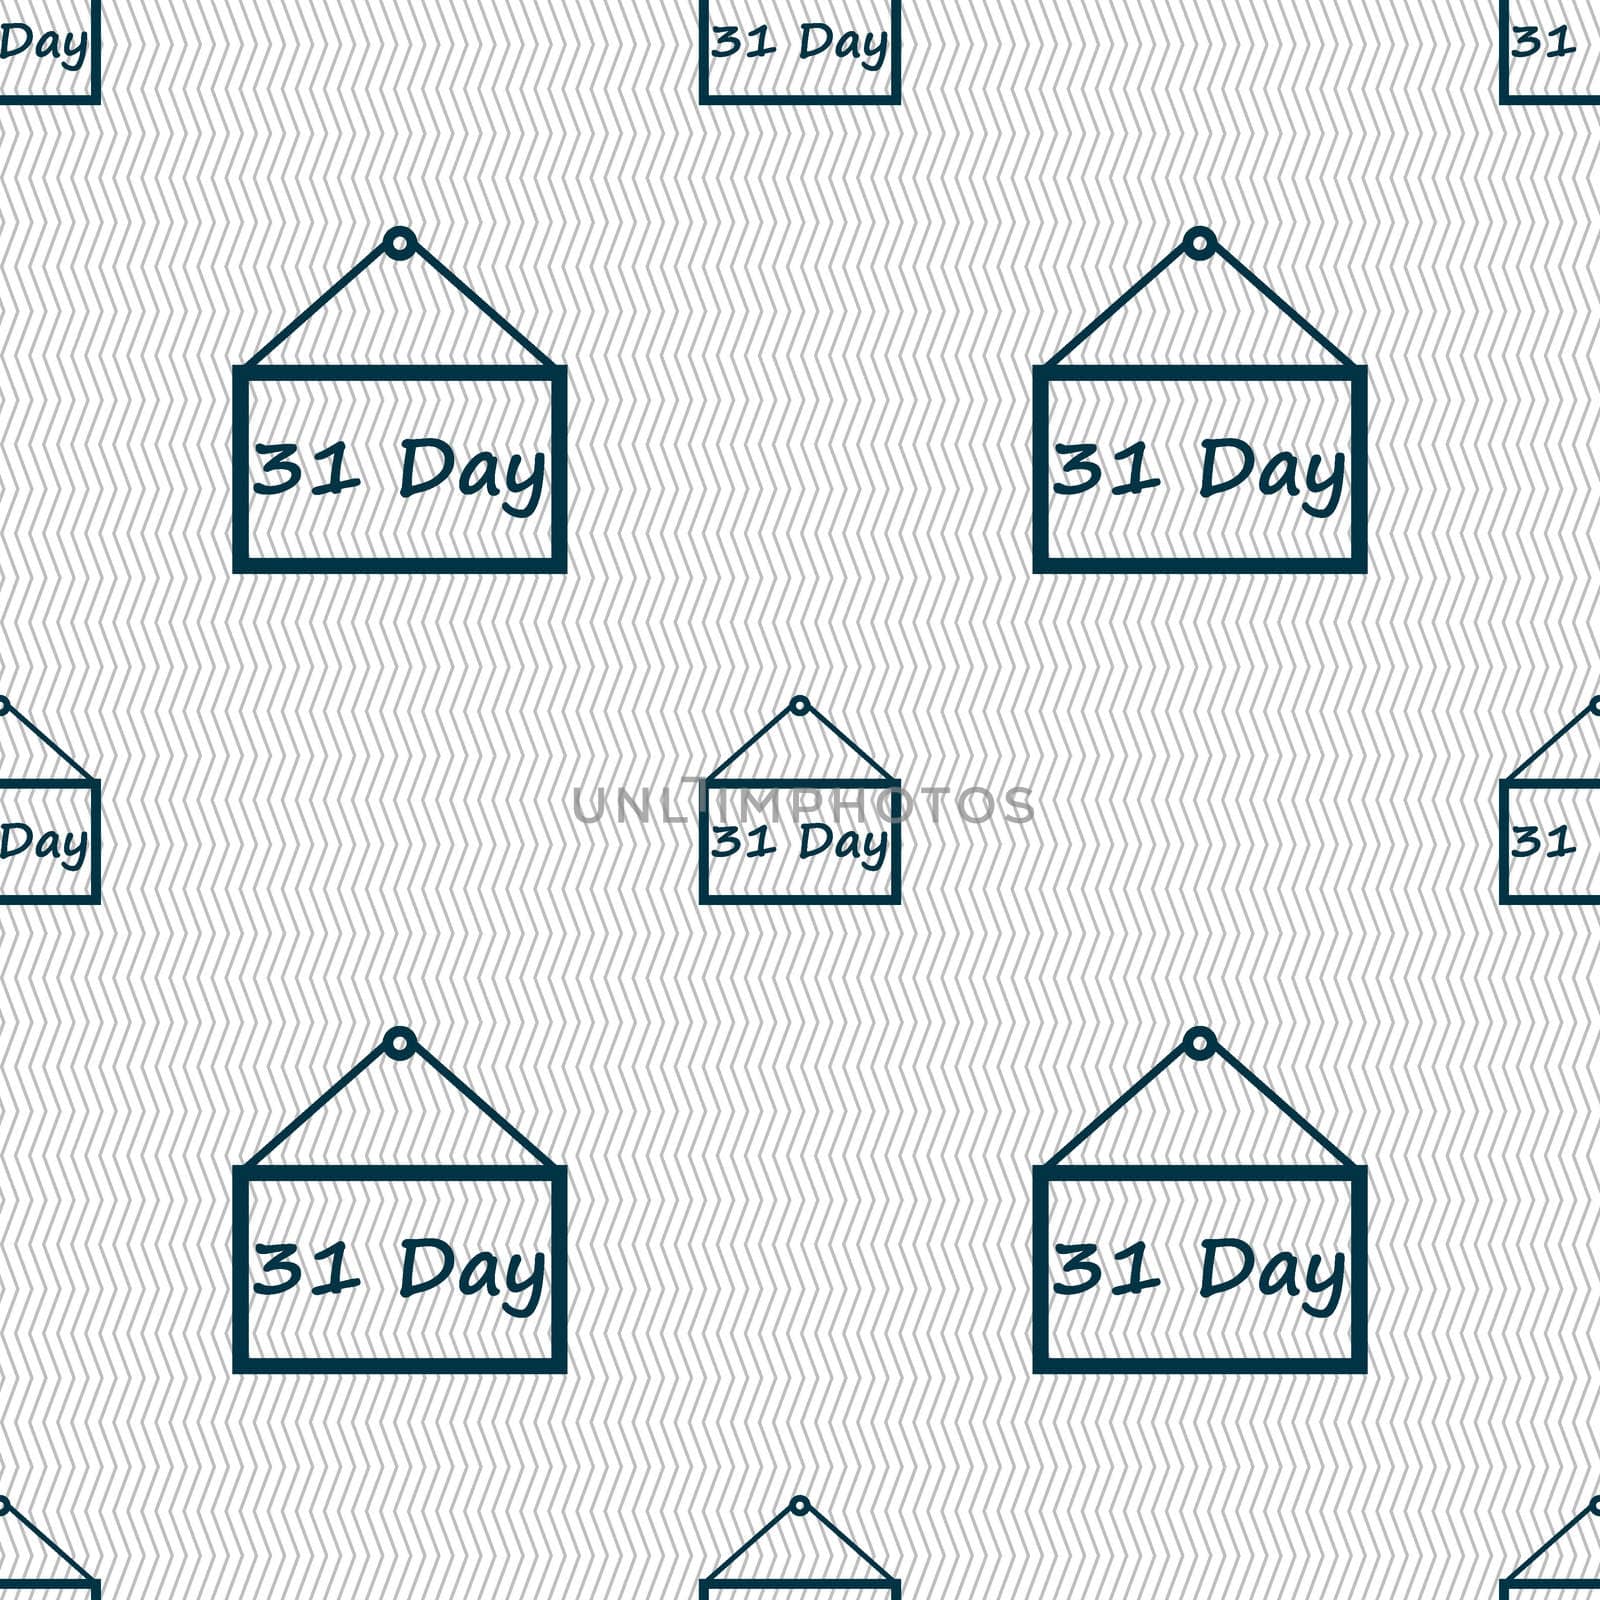 Calendar day, 31 days icon sign. Seamless abstract background with geometric shapes. illustration